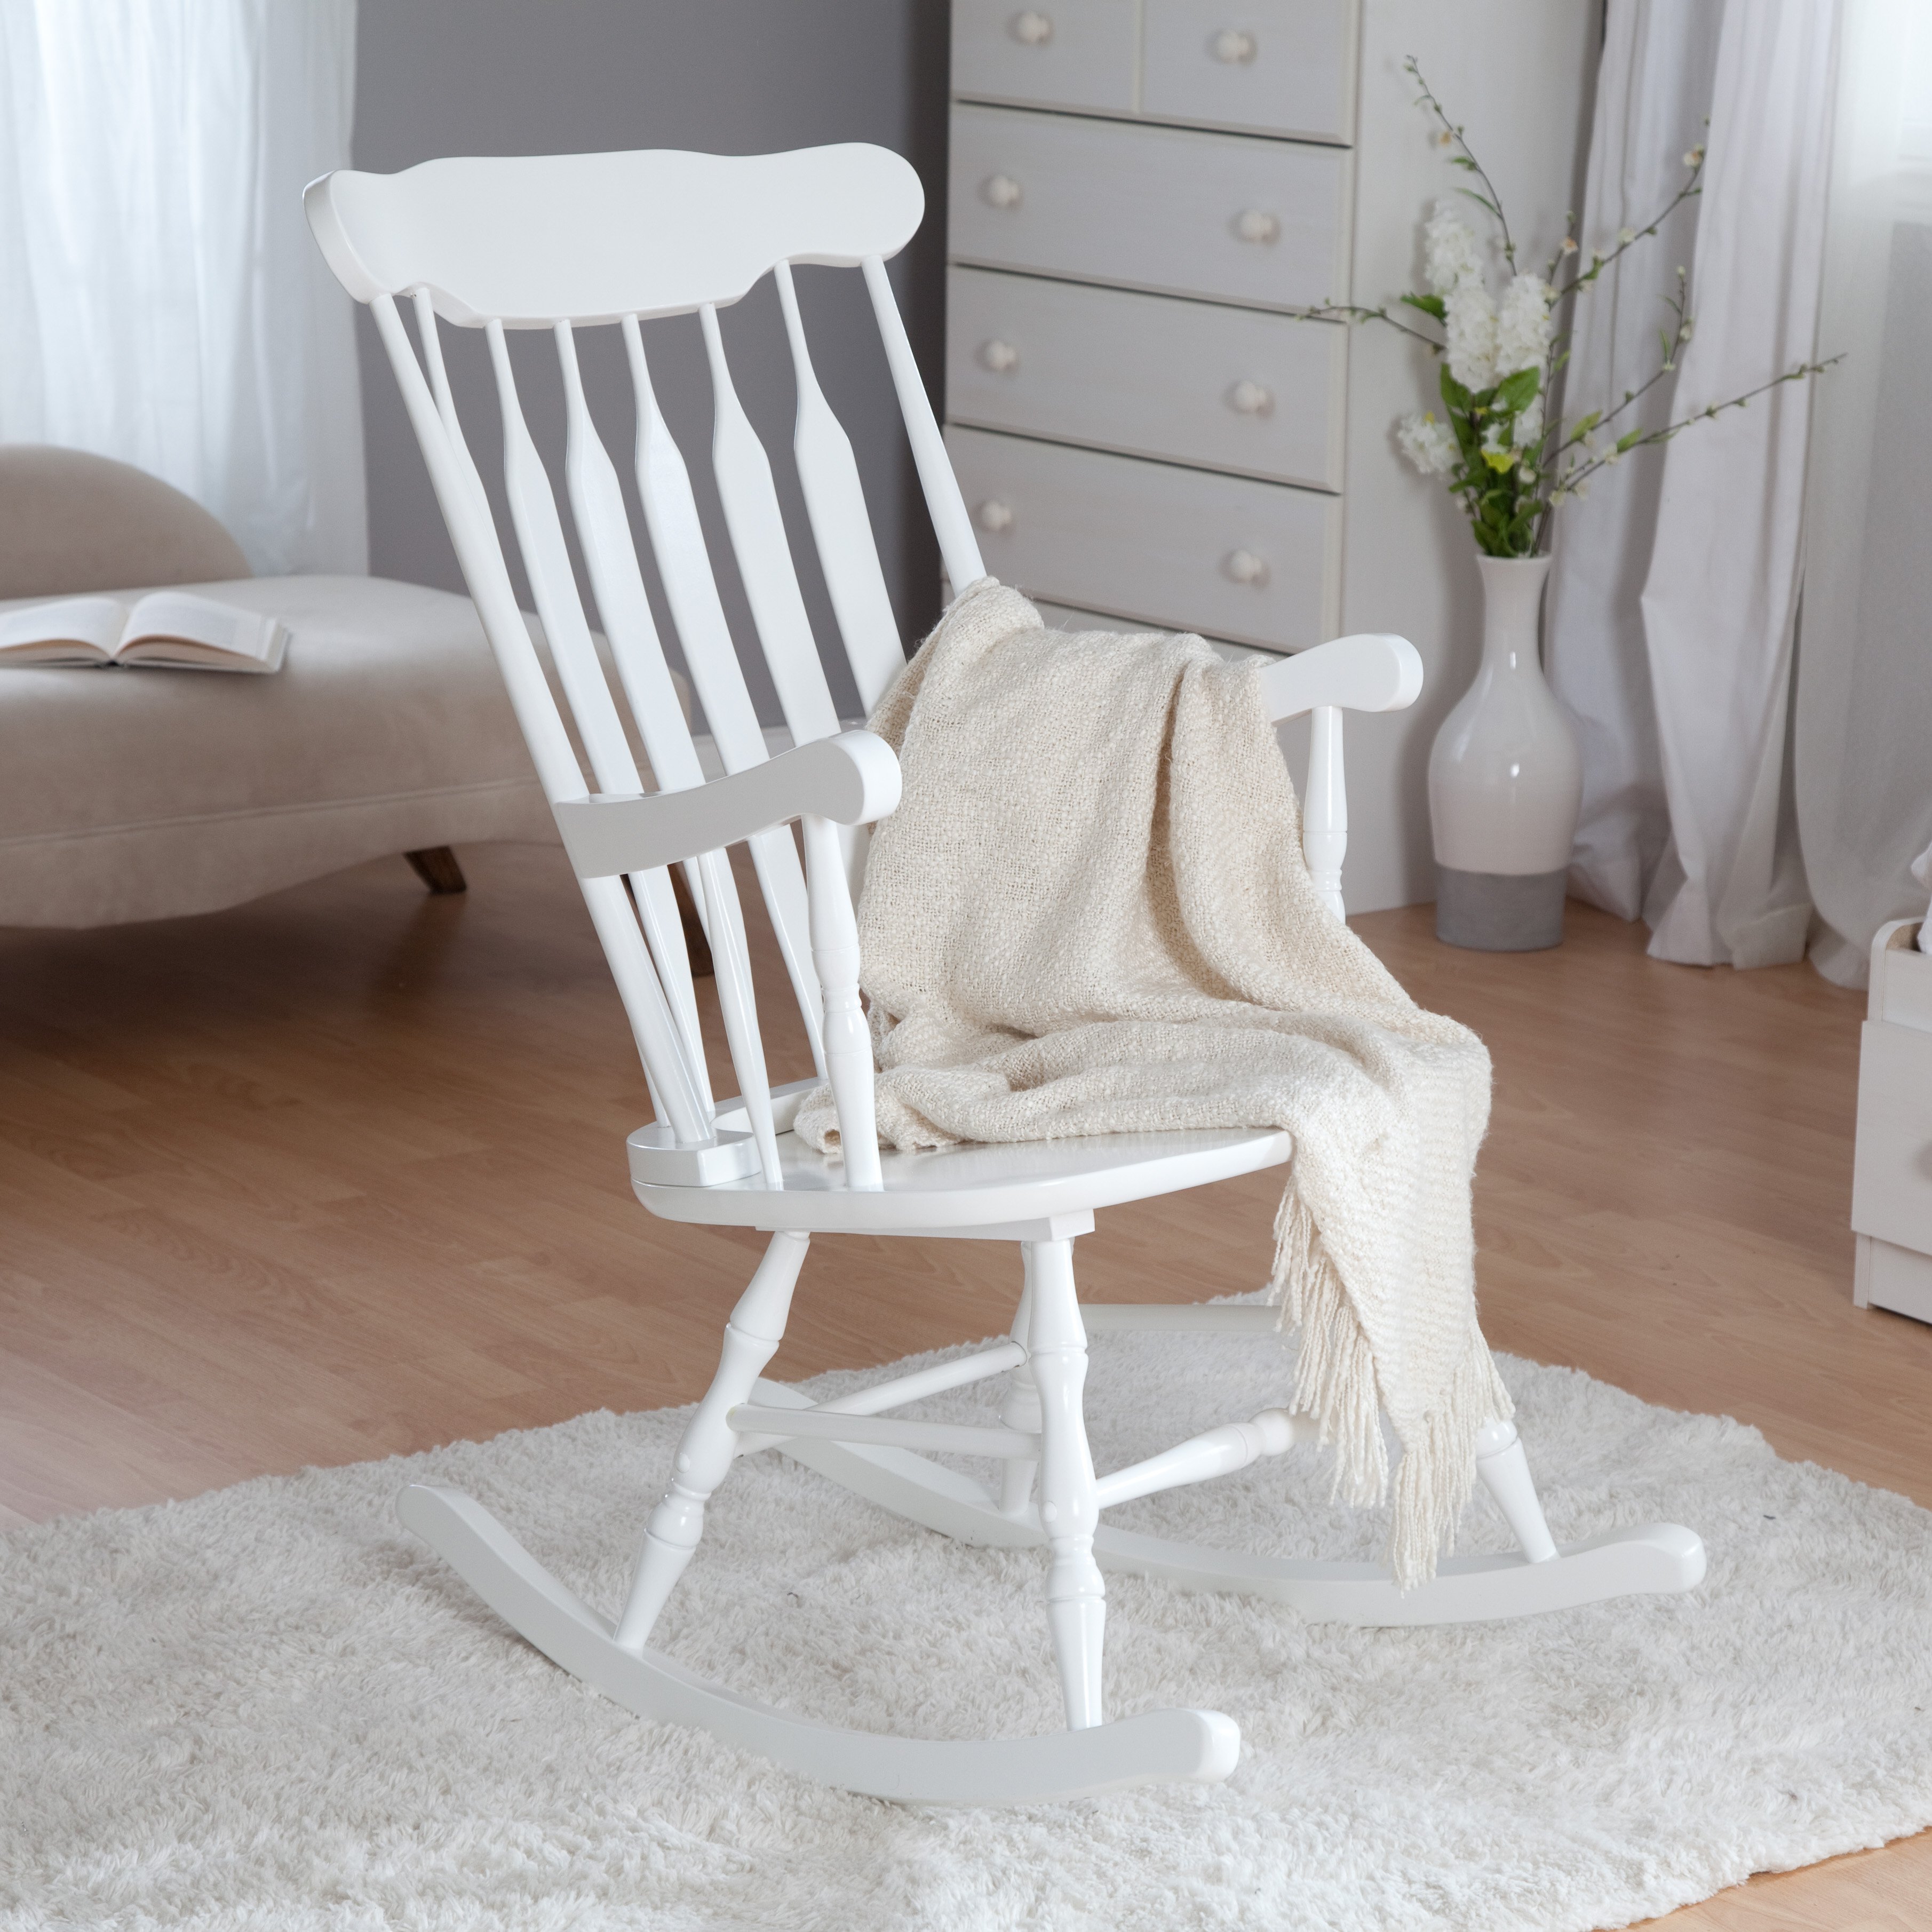 rocking chair for babys room master:kd